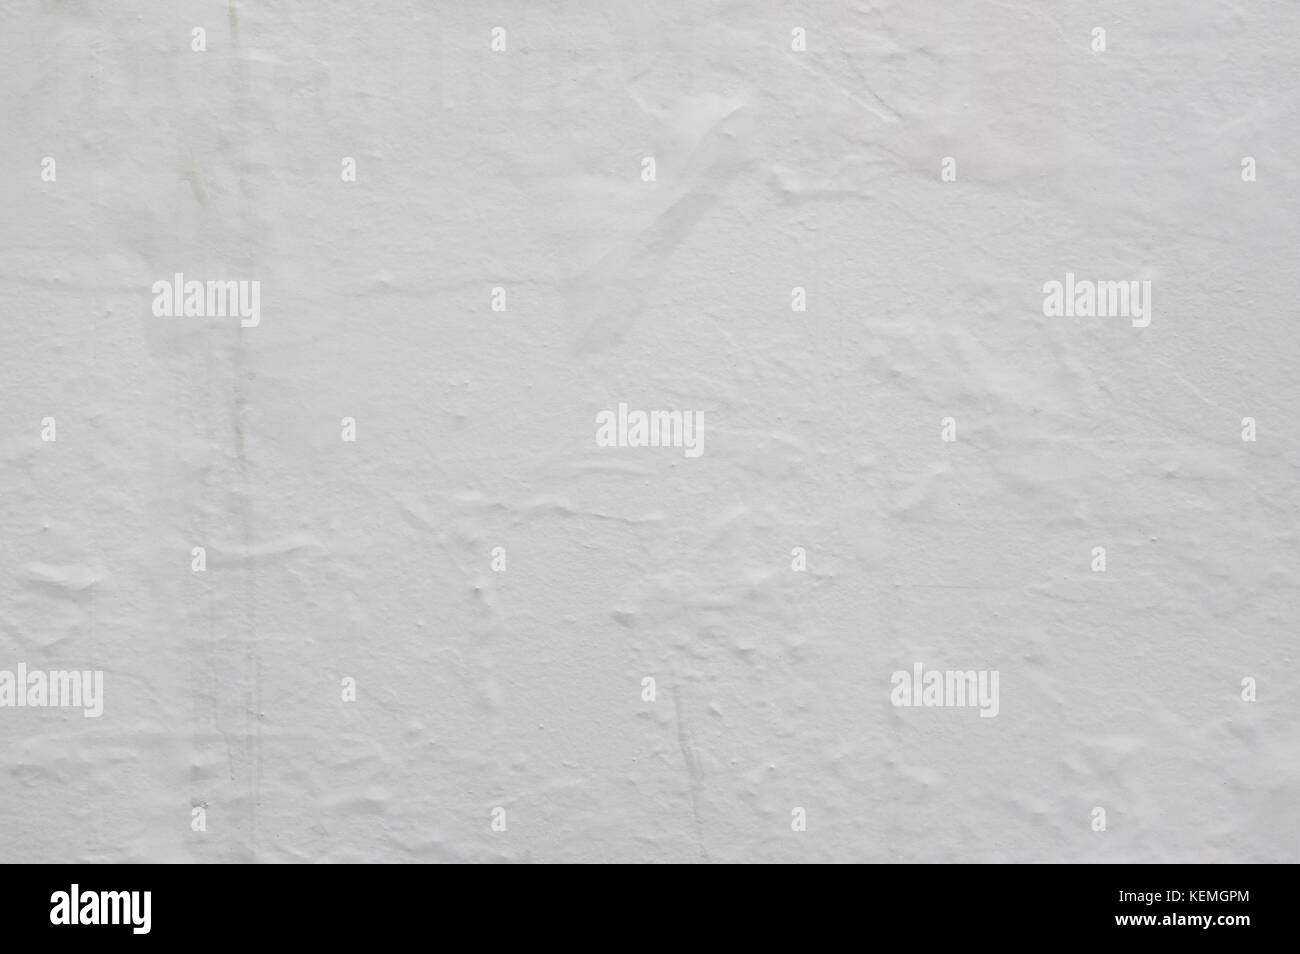 Blank paper poster texture Stock Photo - Alamy